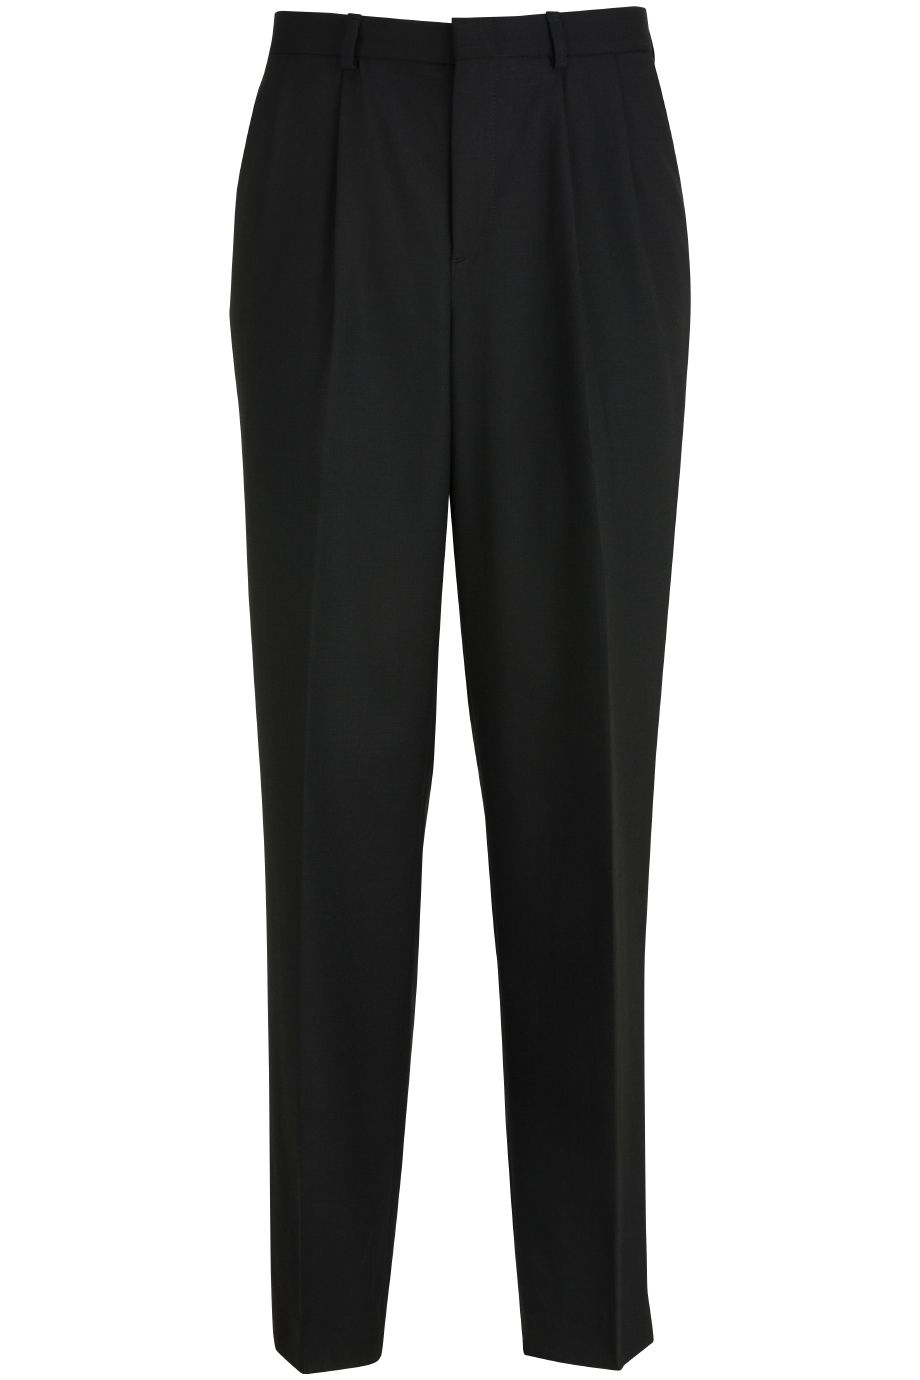 54 Edwards Mens Business Casual Pleated Pant Black 